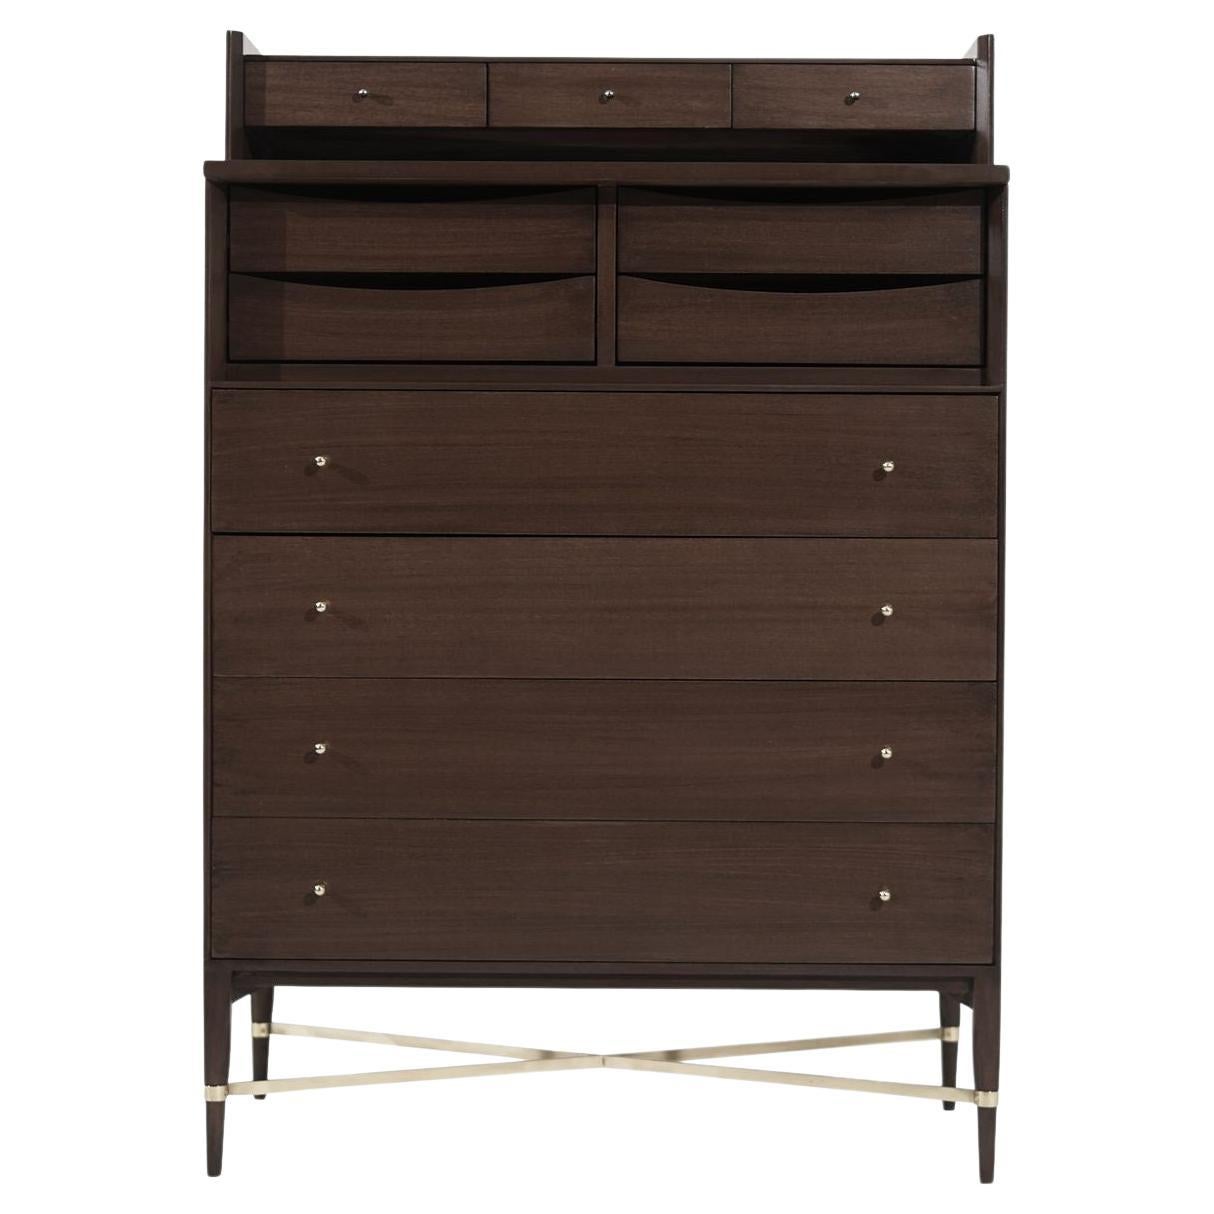 Paul McCobb Gentleman's Chest of Drawers in Mahogany, circa 1950s For Sale